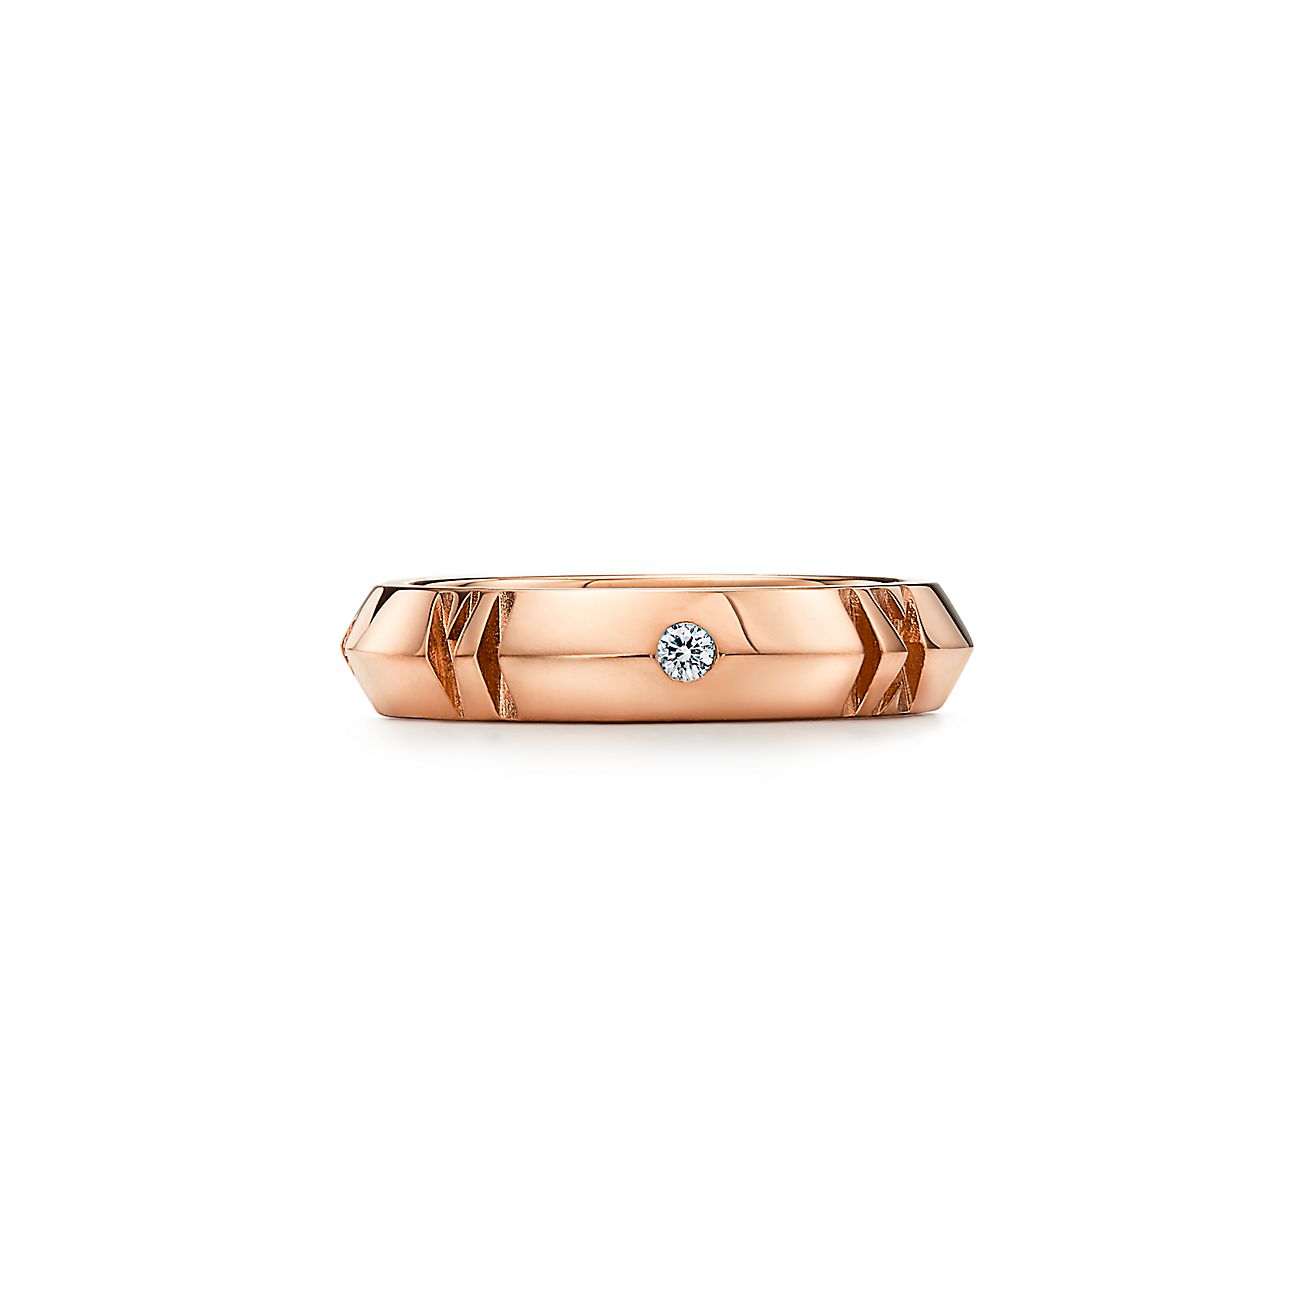 Atlas® X Closed Narrow Ring in Rose Gold with Diamonds, 4.5 mm Wide |  Tiffany & Co.